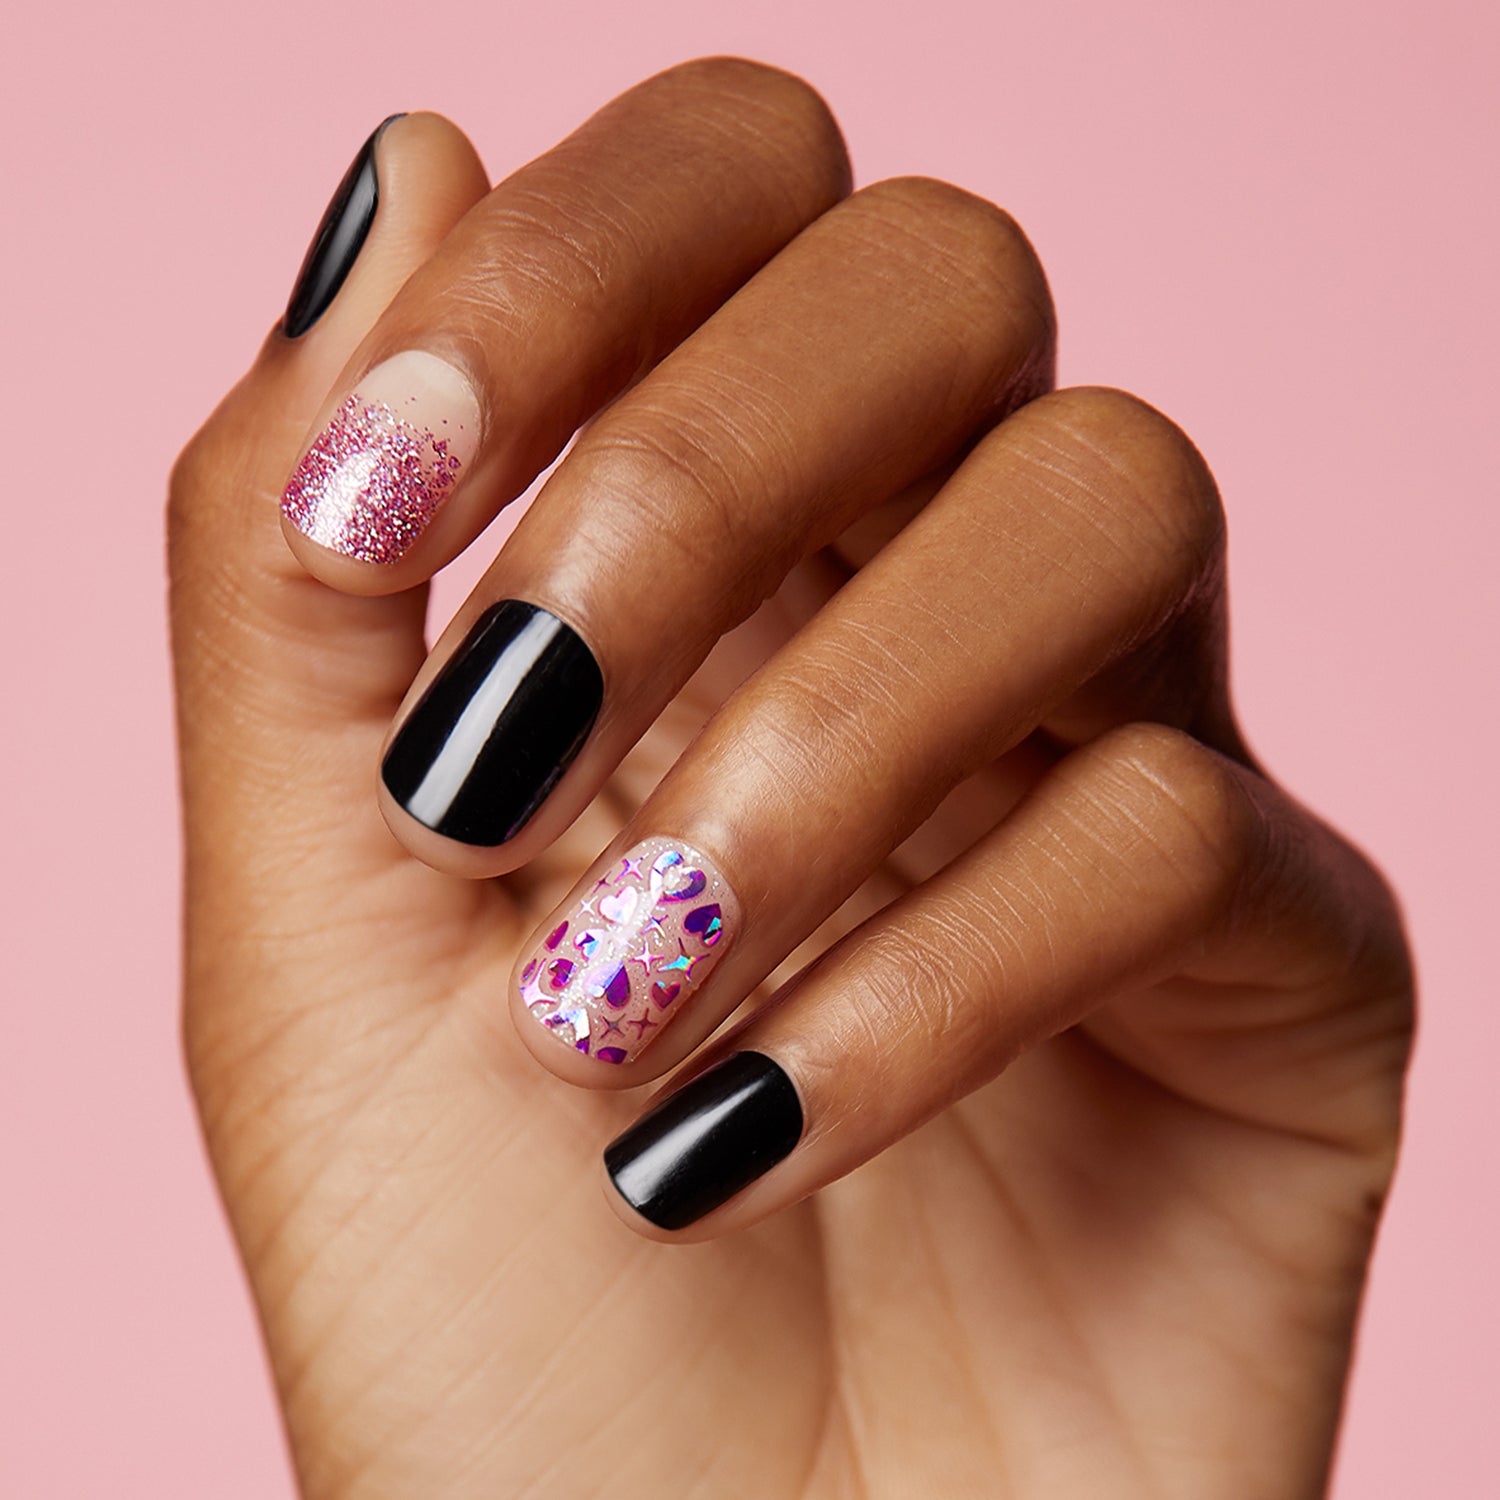 5 holographic nail art ideas you need to copy ASAP